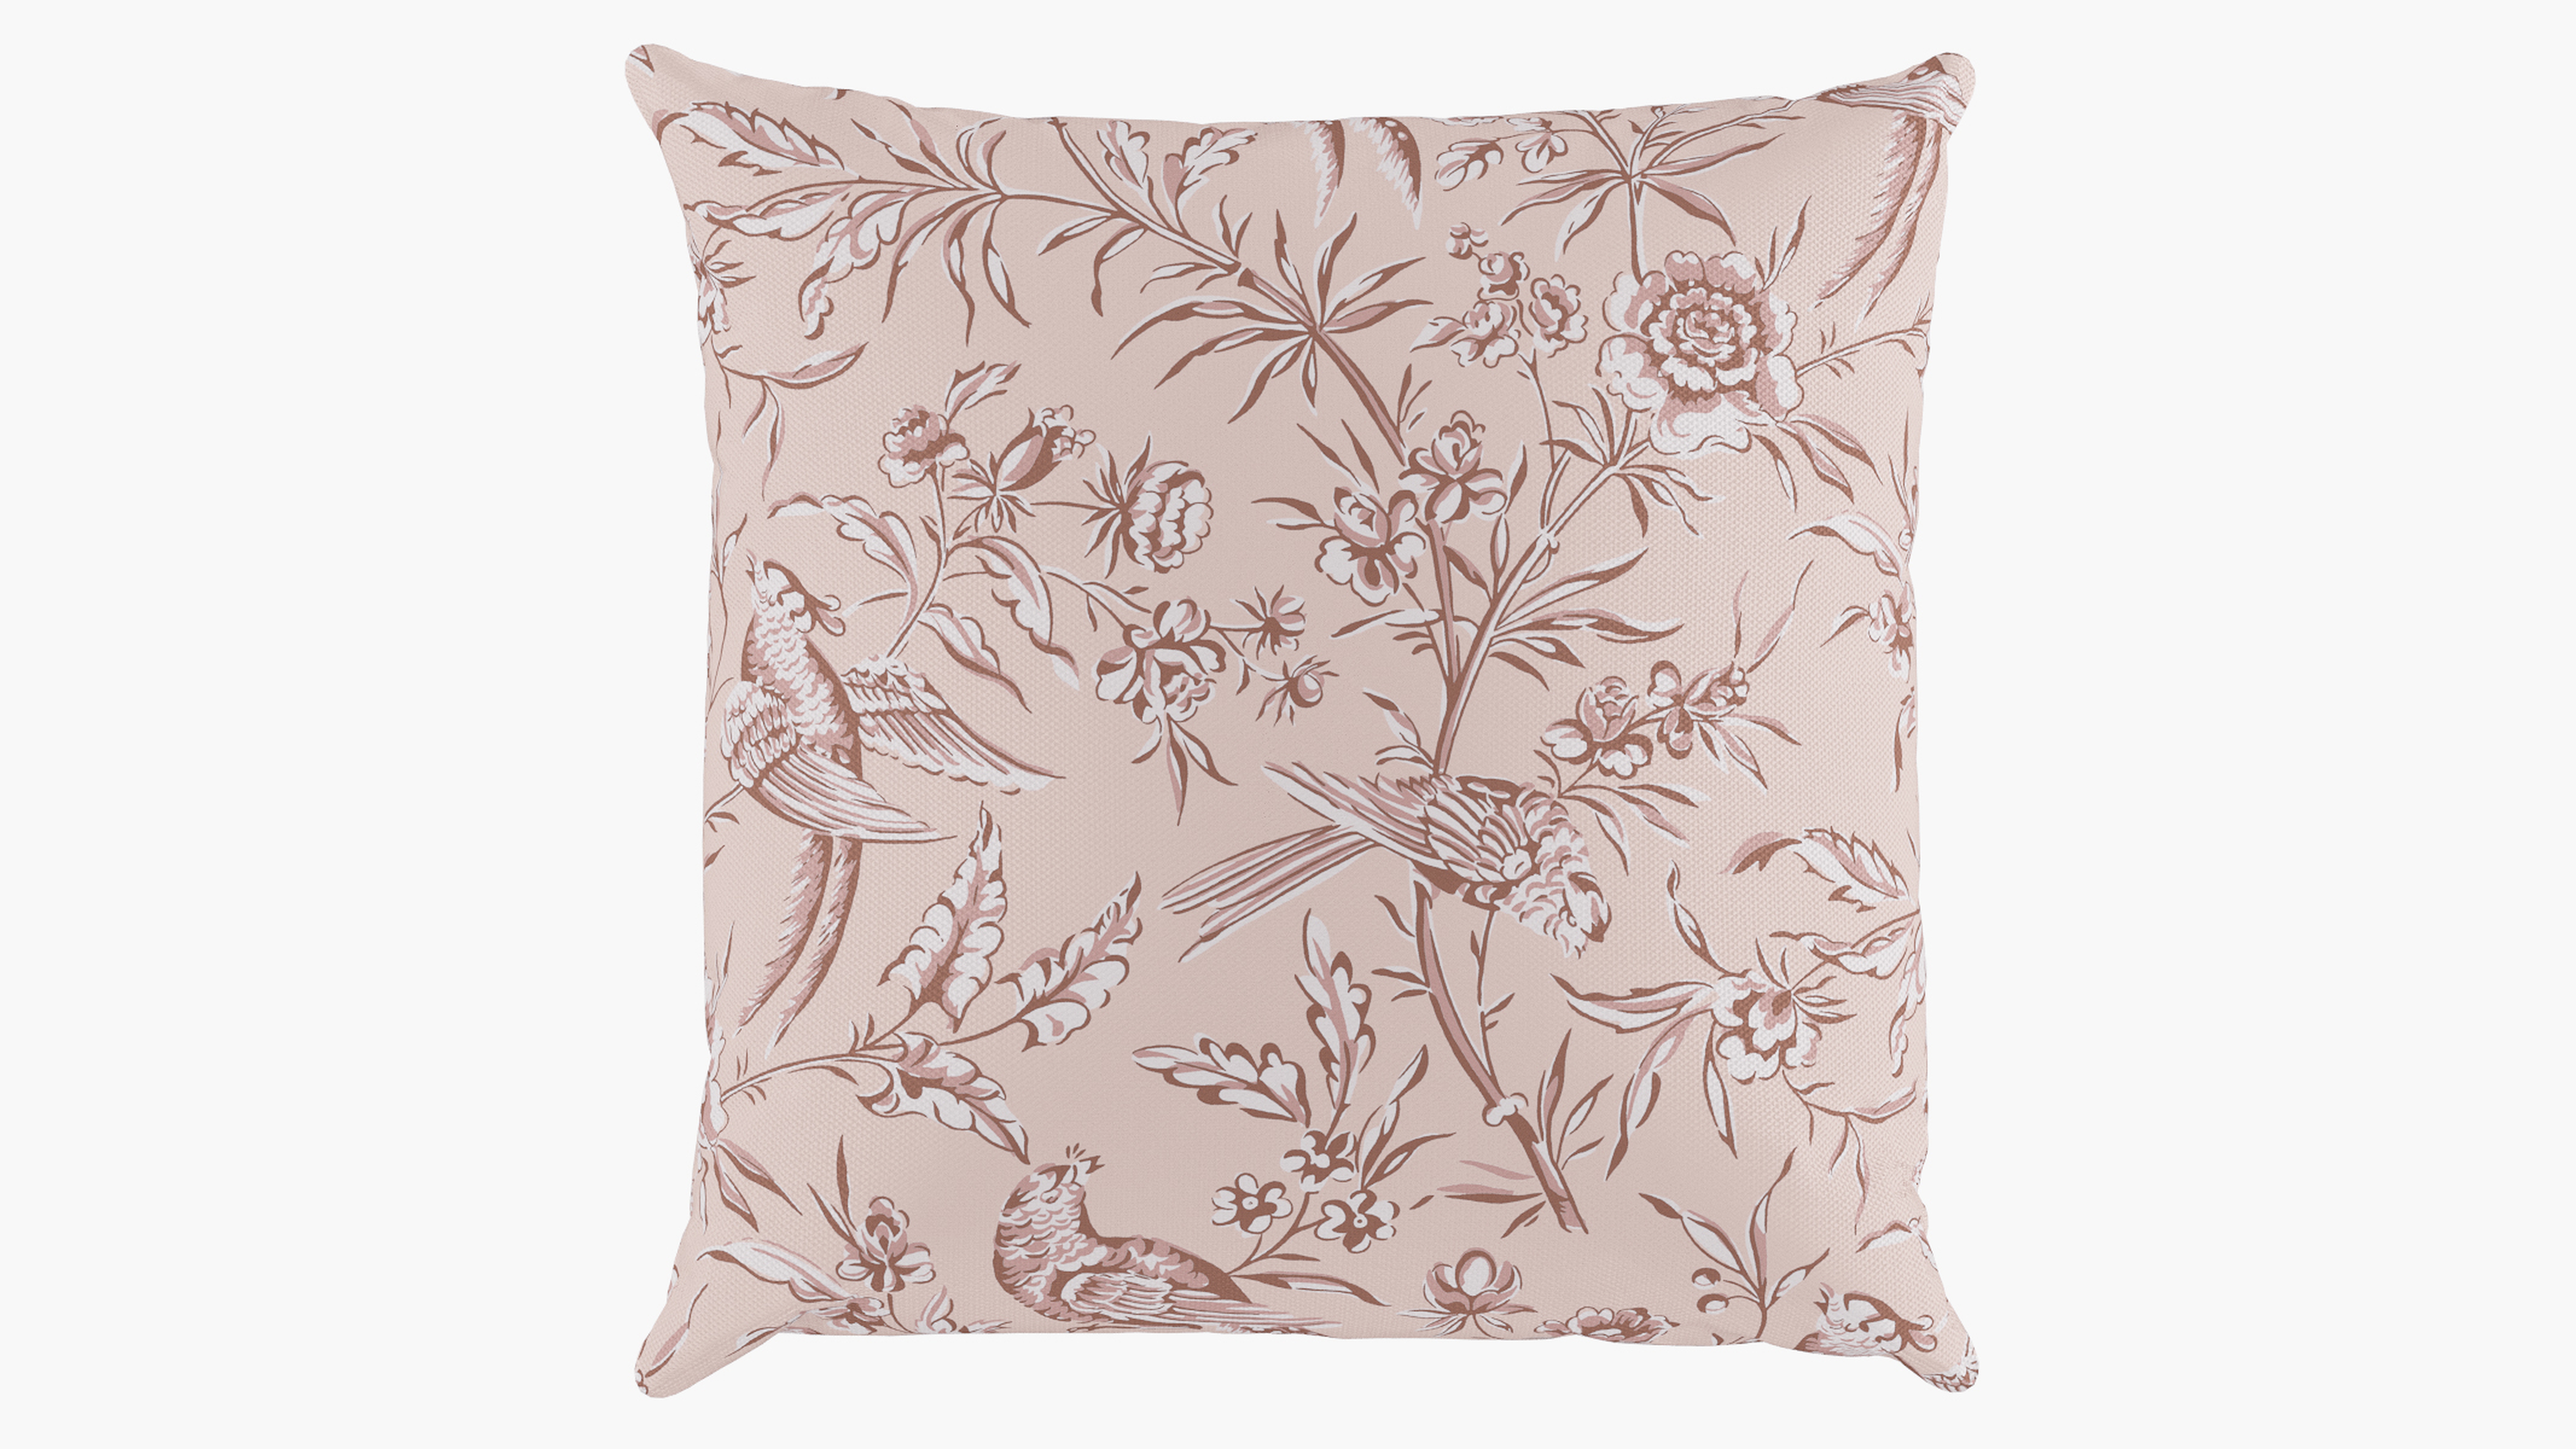 Outdoor 16" Throw Pillow, Blush Aviary, 16" x 16" - The Inside